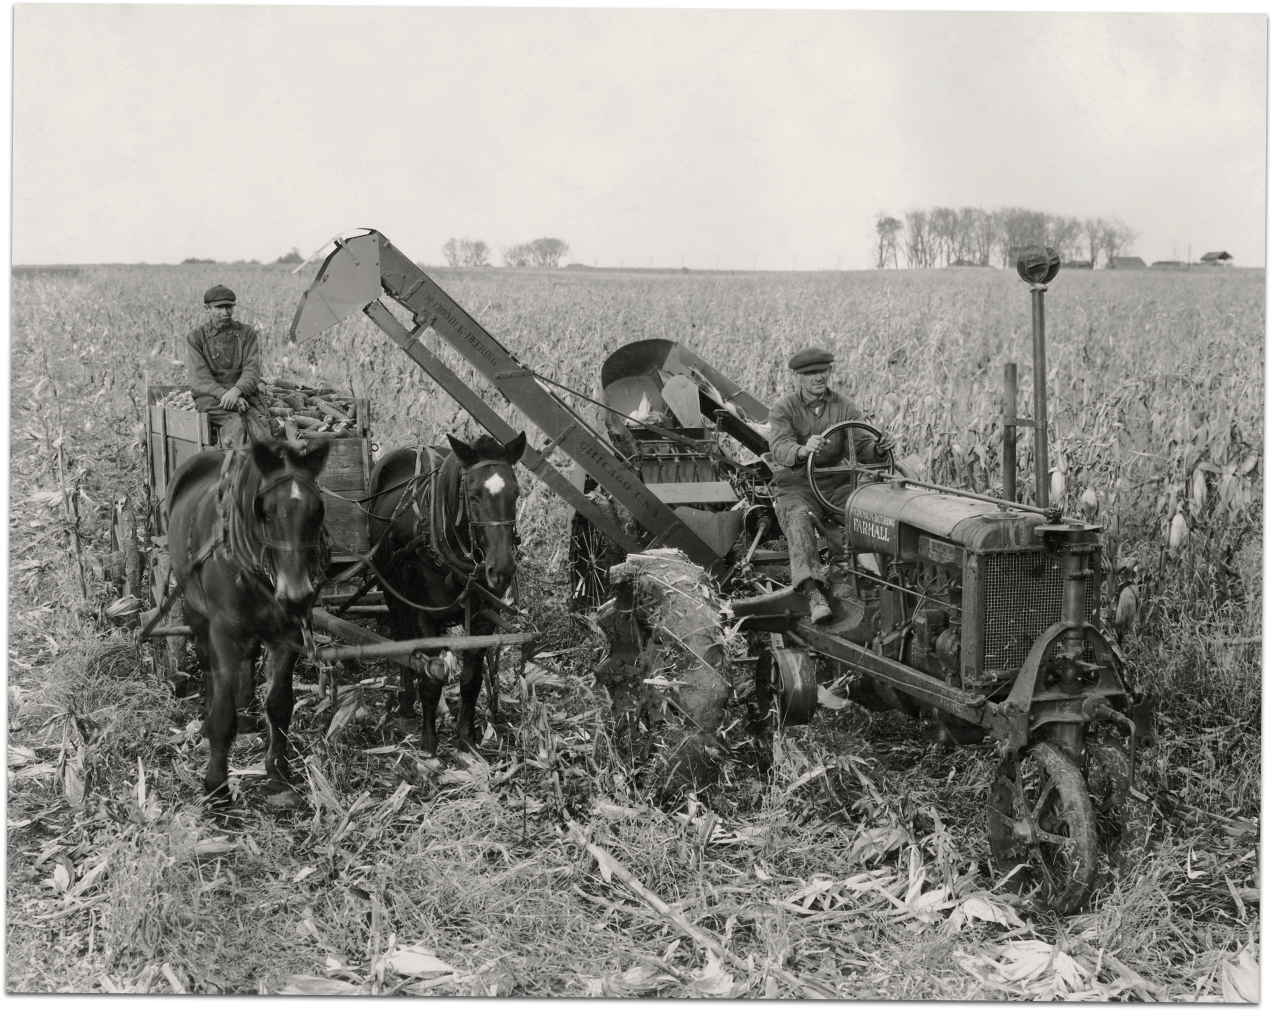 Black and white image of a 1932 Farmall F series harvesting corn followed by a horse drawn wagon